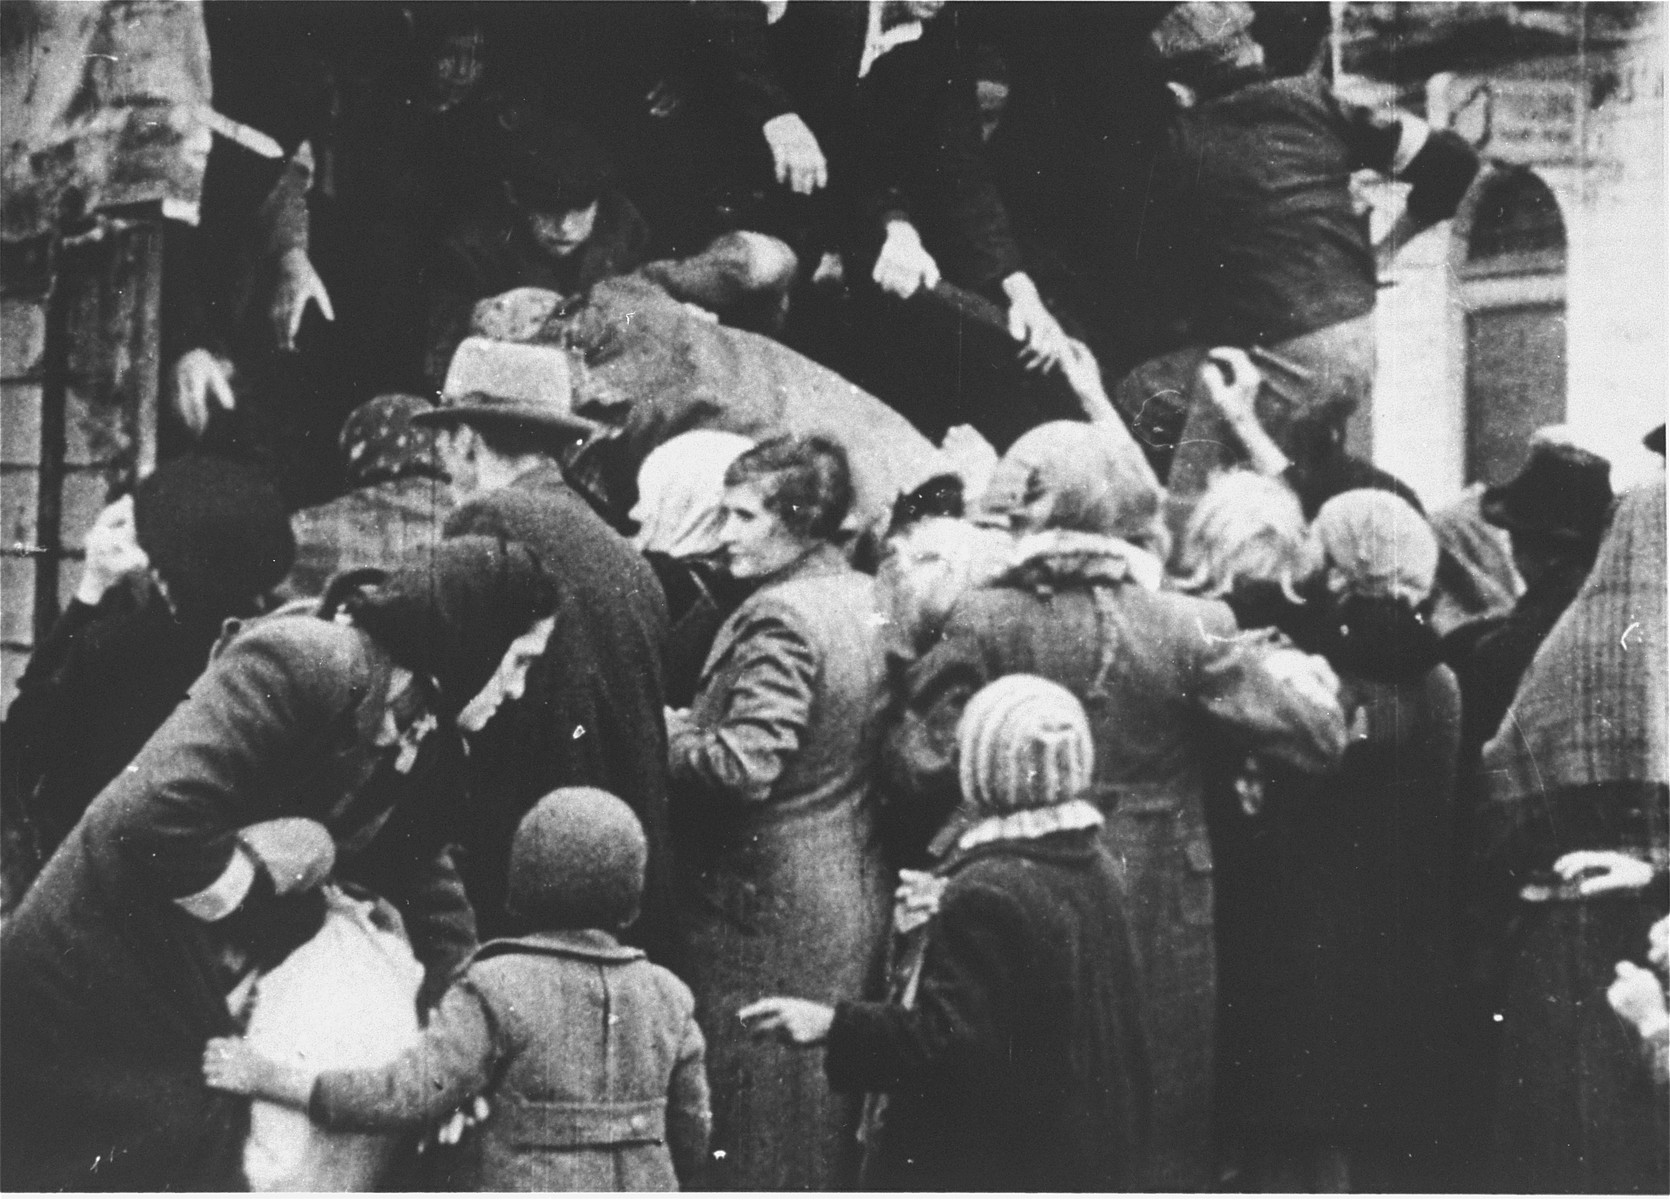 Jews captured by the SS during the suppression of the Warsaw ghetto uprising are forced to board a truck that will likely take them to a labor camp. 

Most of the people captured during the ghetto uprising were deported to Treblinka, however, some were sent to either Trawniki or Poniatowa.